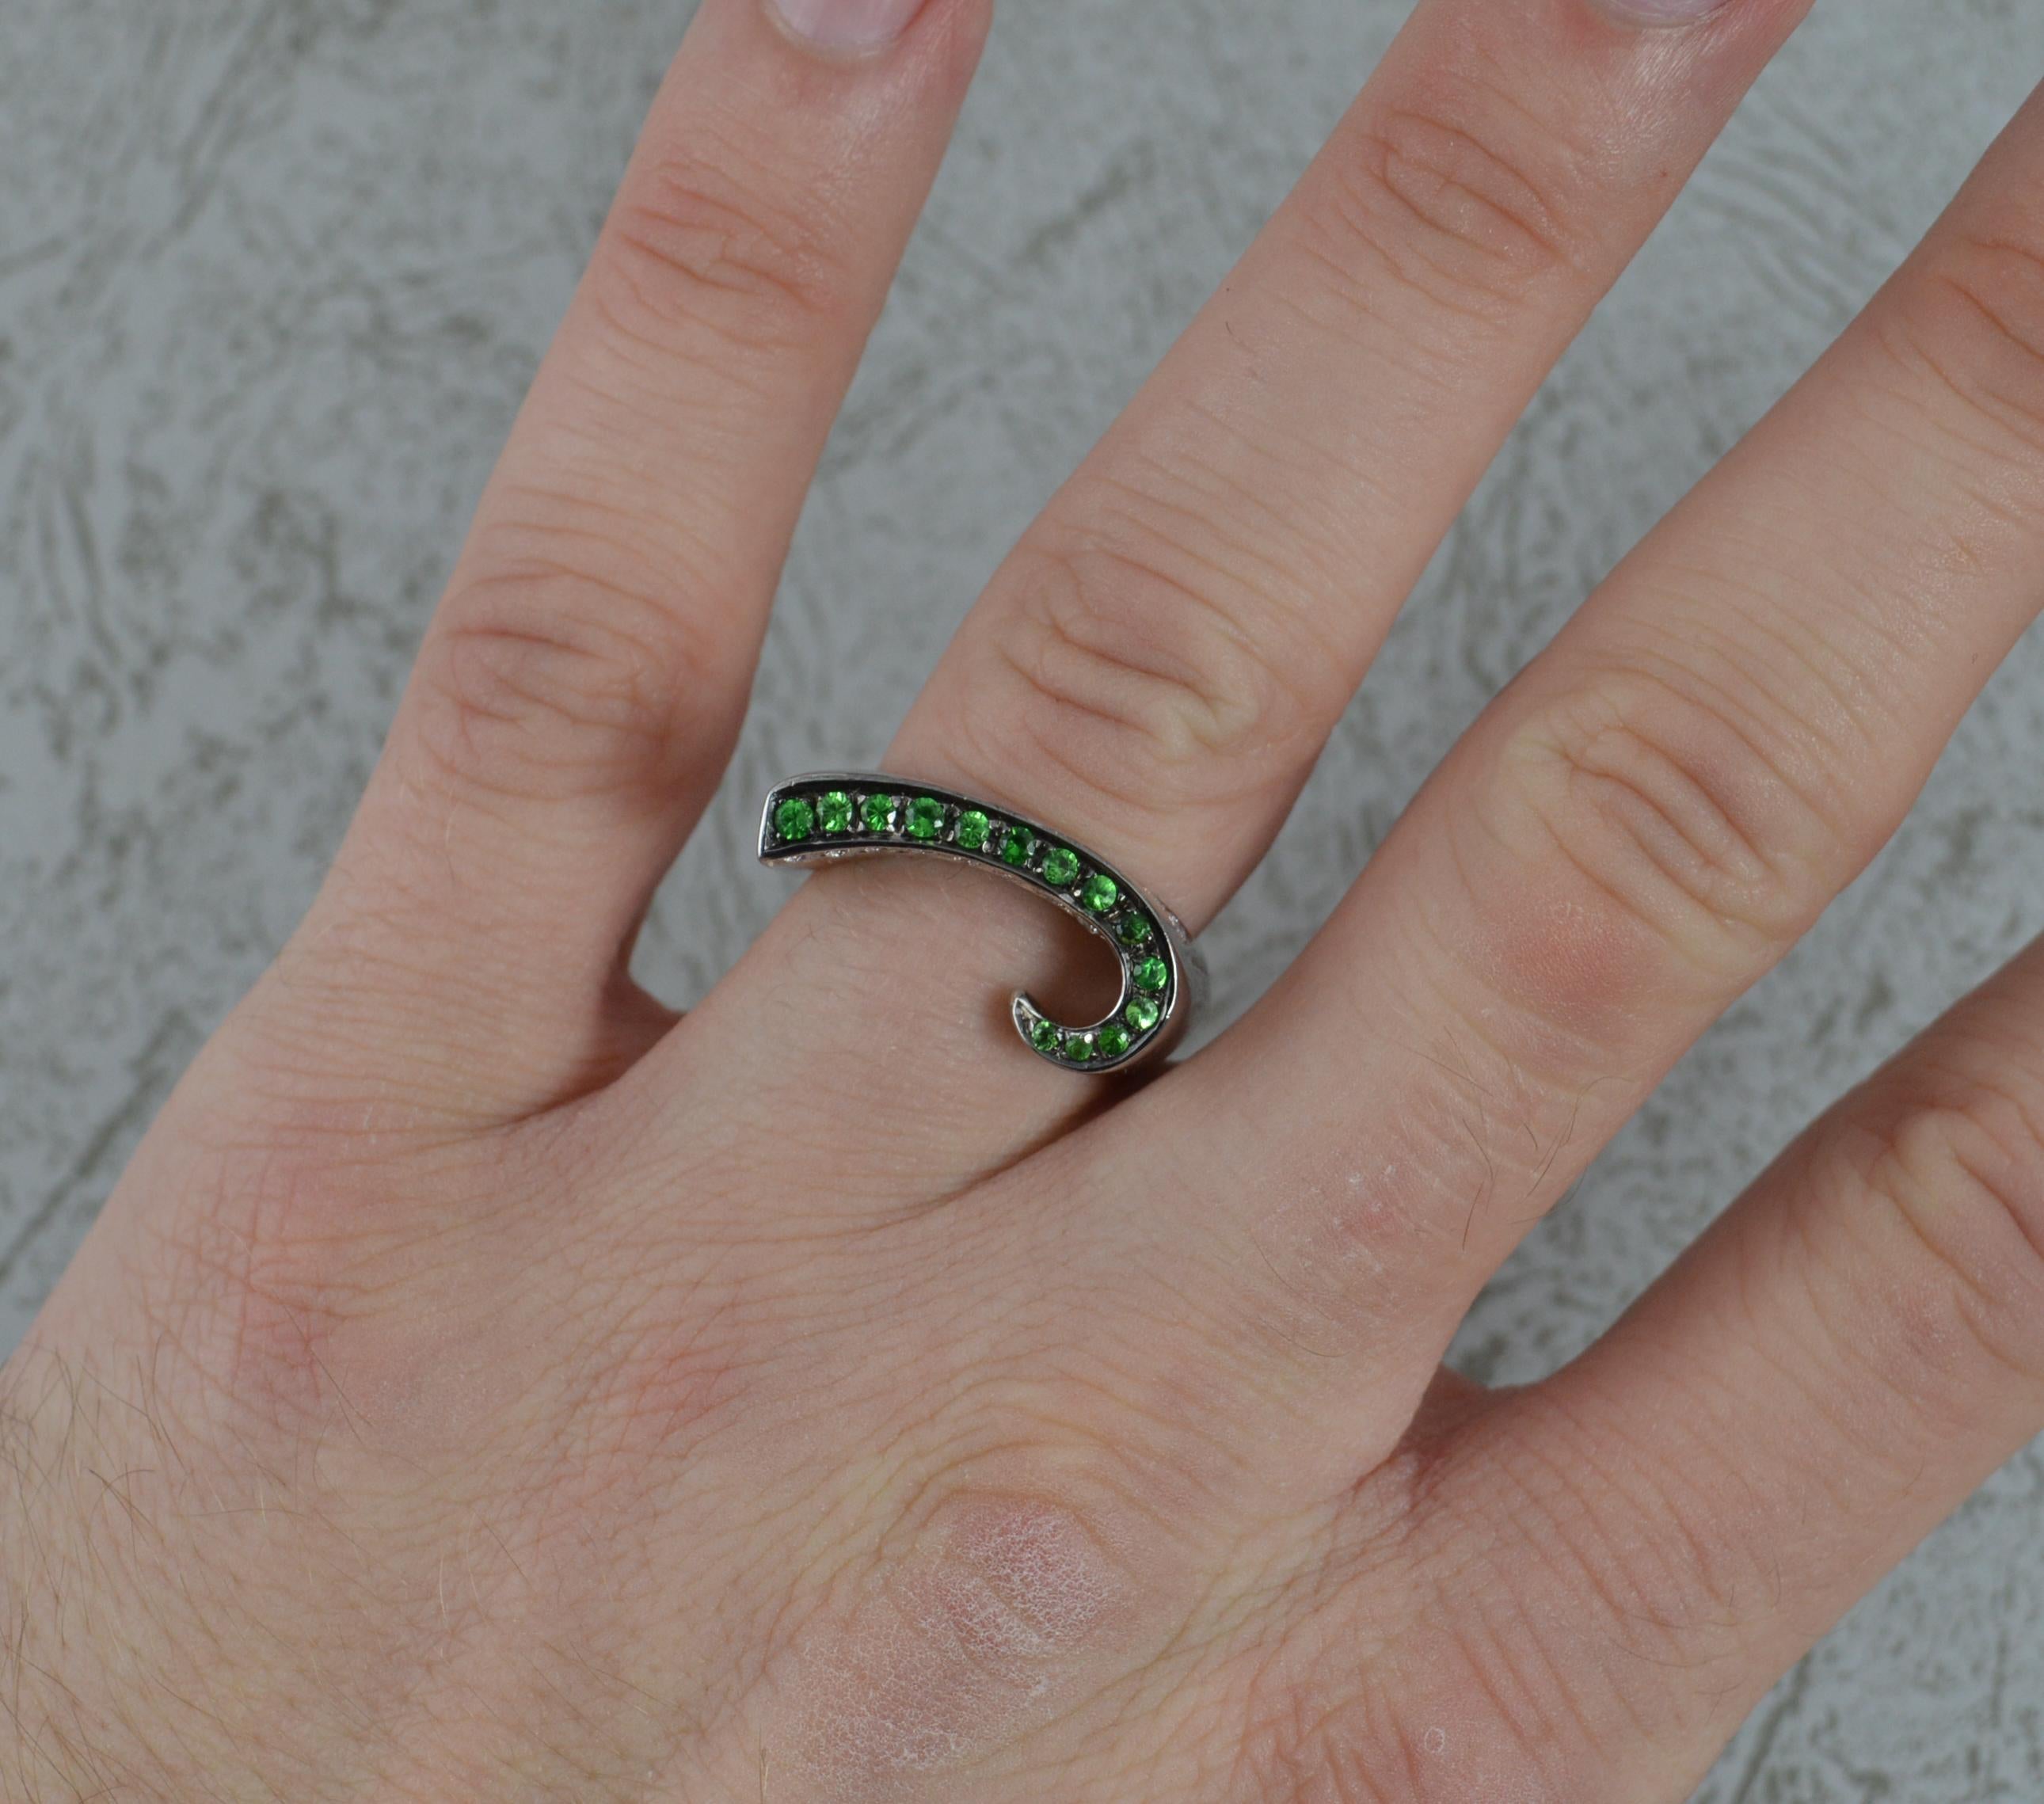 A stunning 18 white carat gold, green garnet and diamond ring.
18 carat white gold shank and setting with blackened setting for the garnets.
Designed as a four sided band with wave like finish.
Set with many demantoid green garnets and vs grade